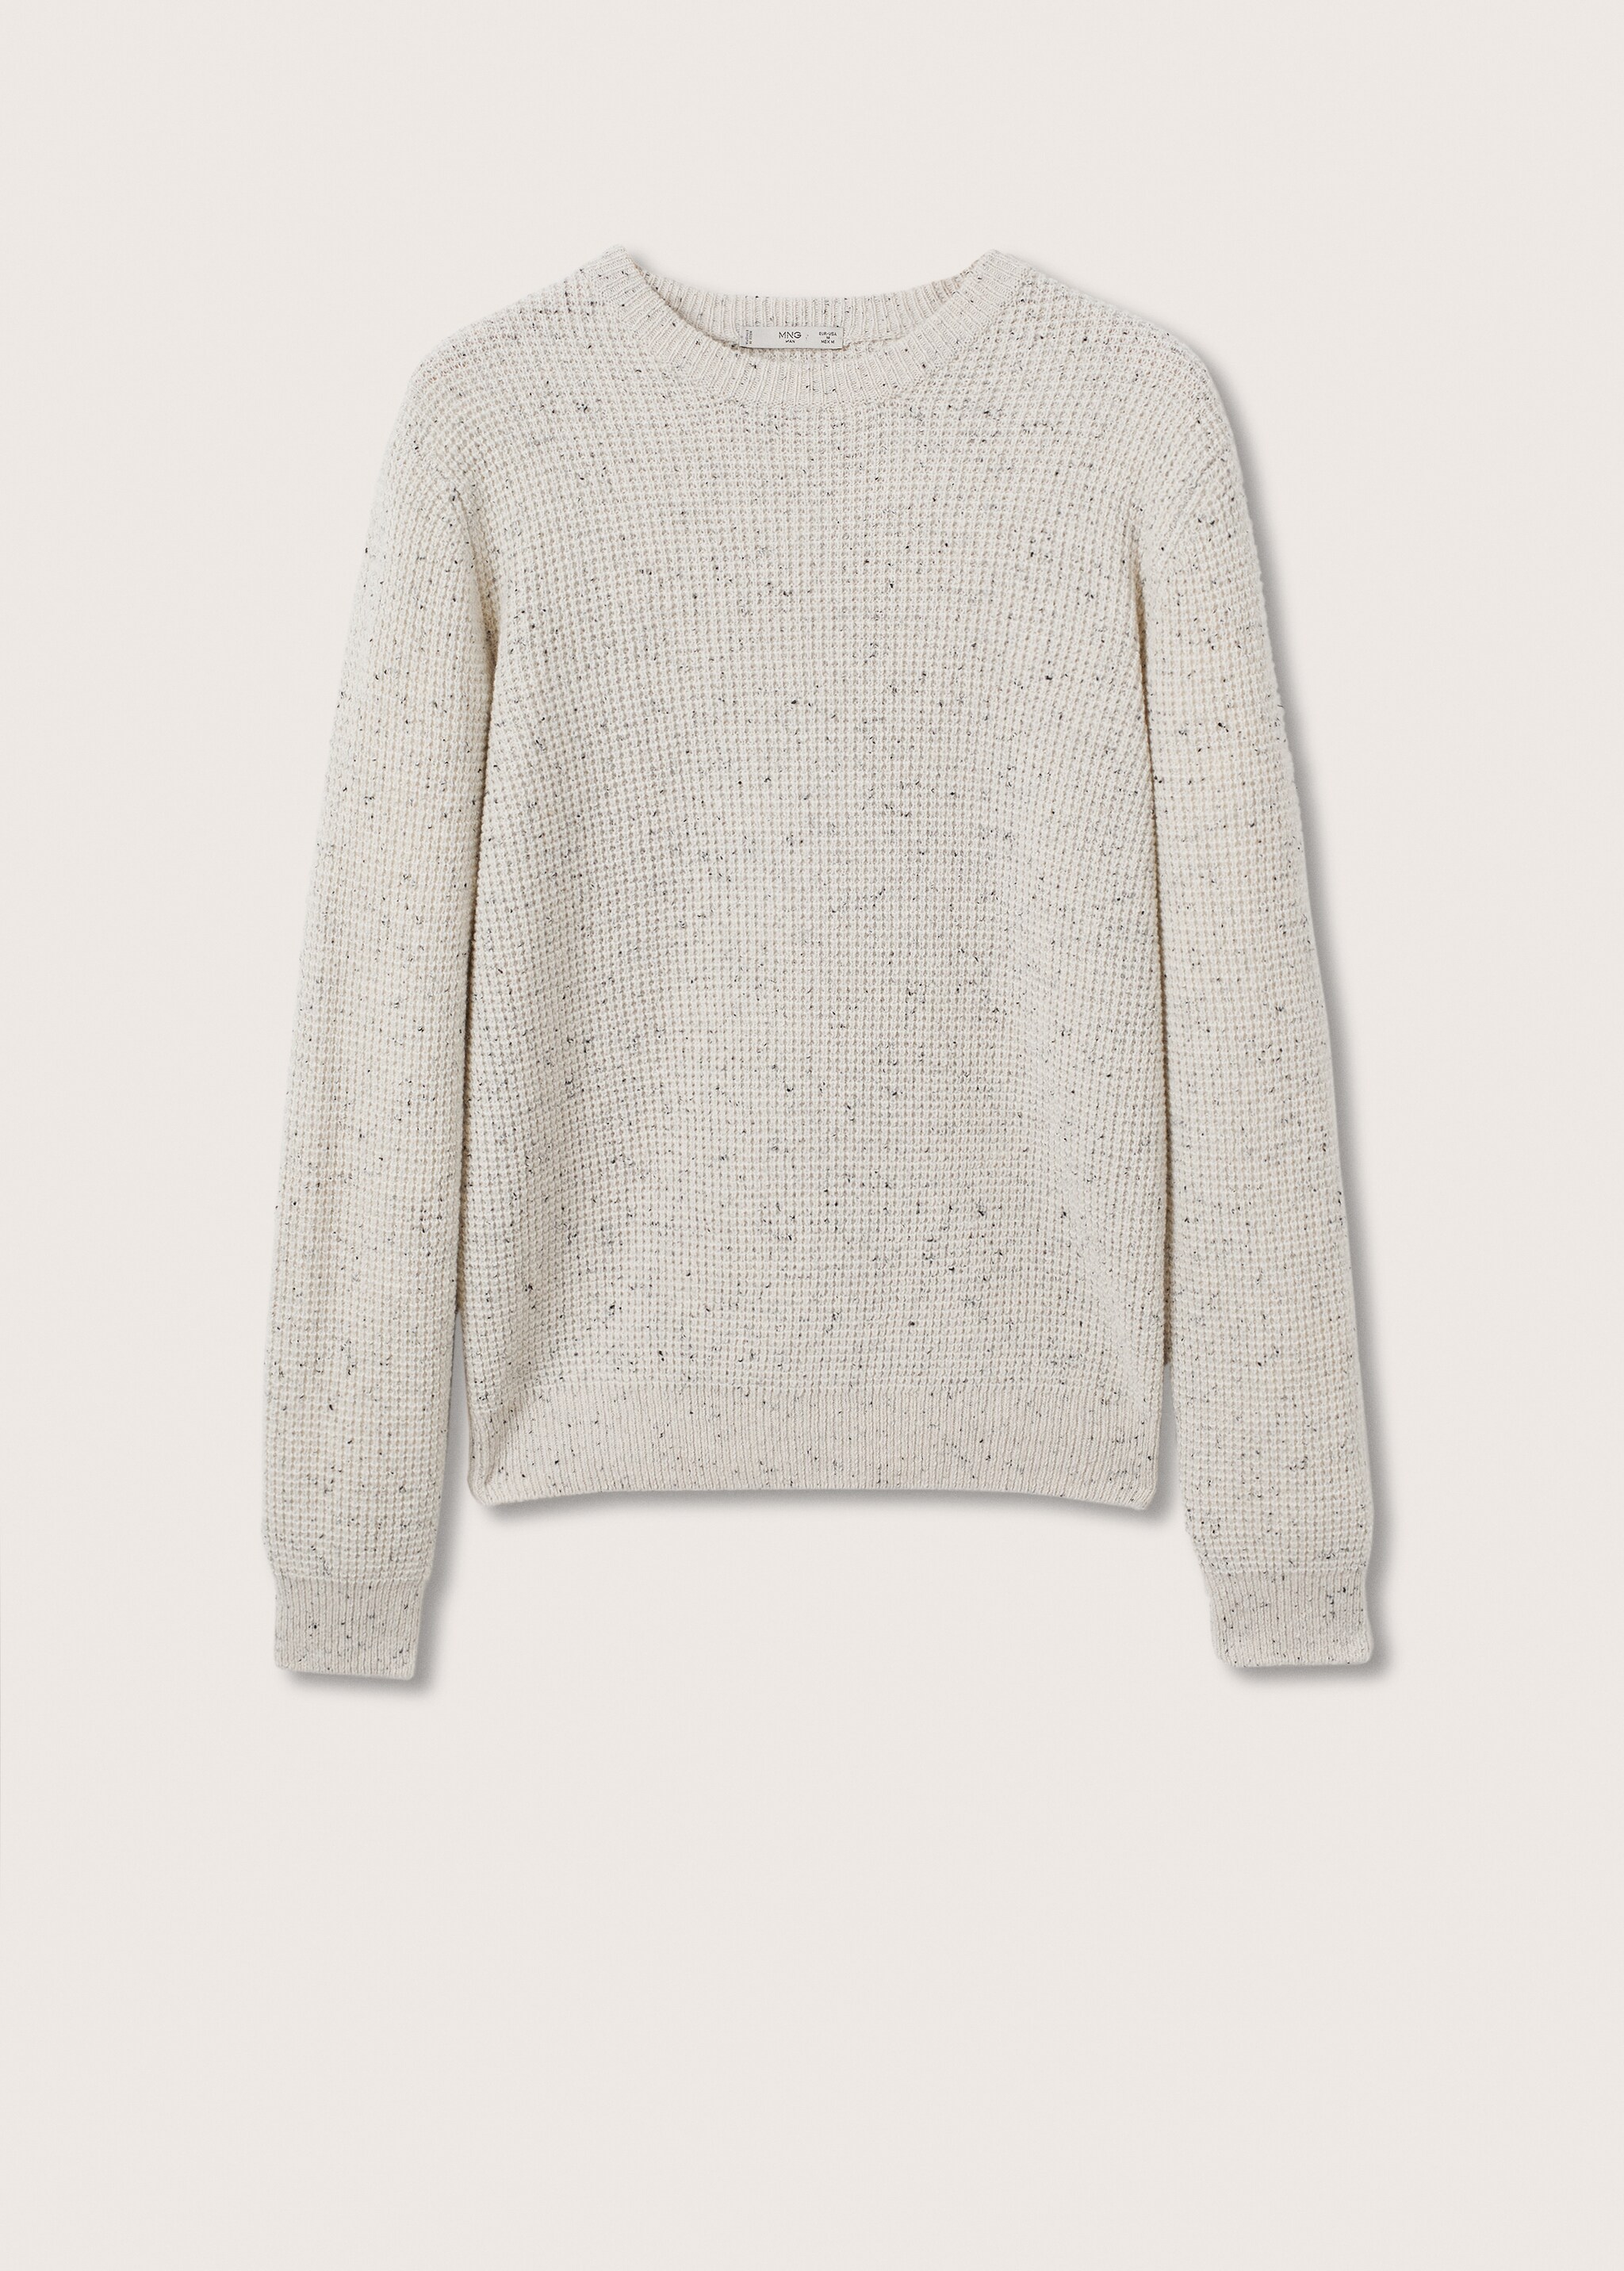 Structured flecked sweater - Article without model